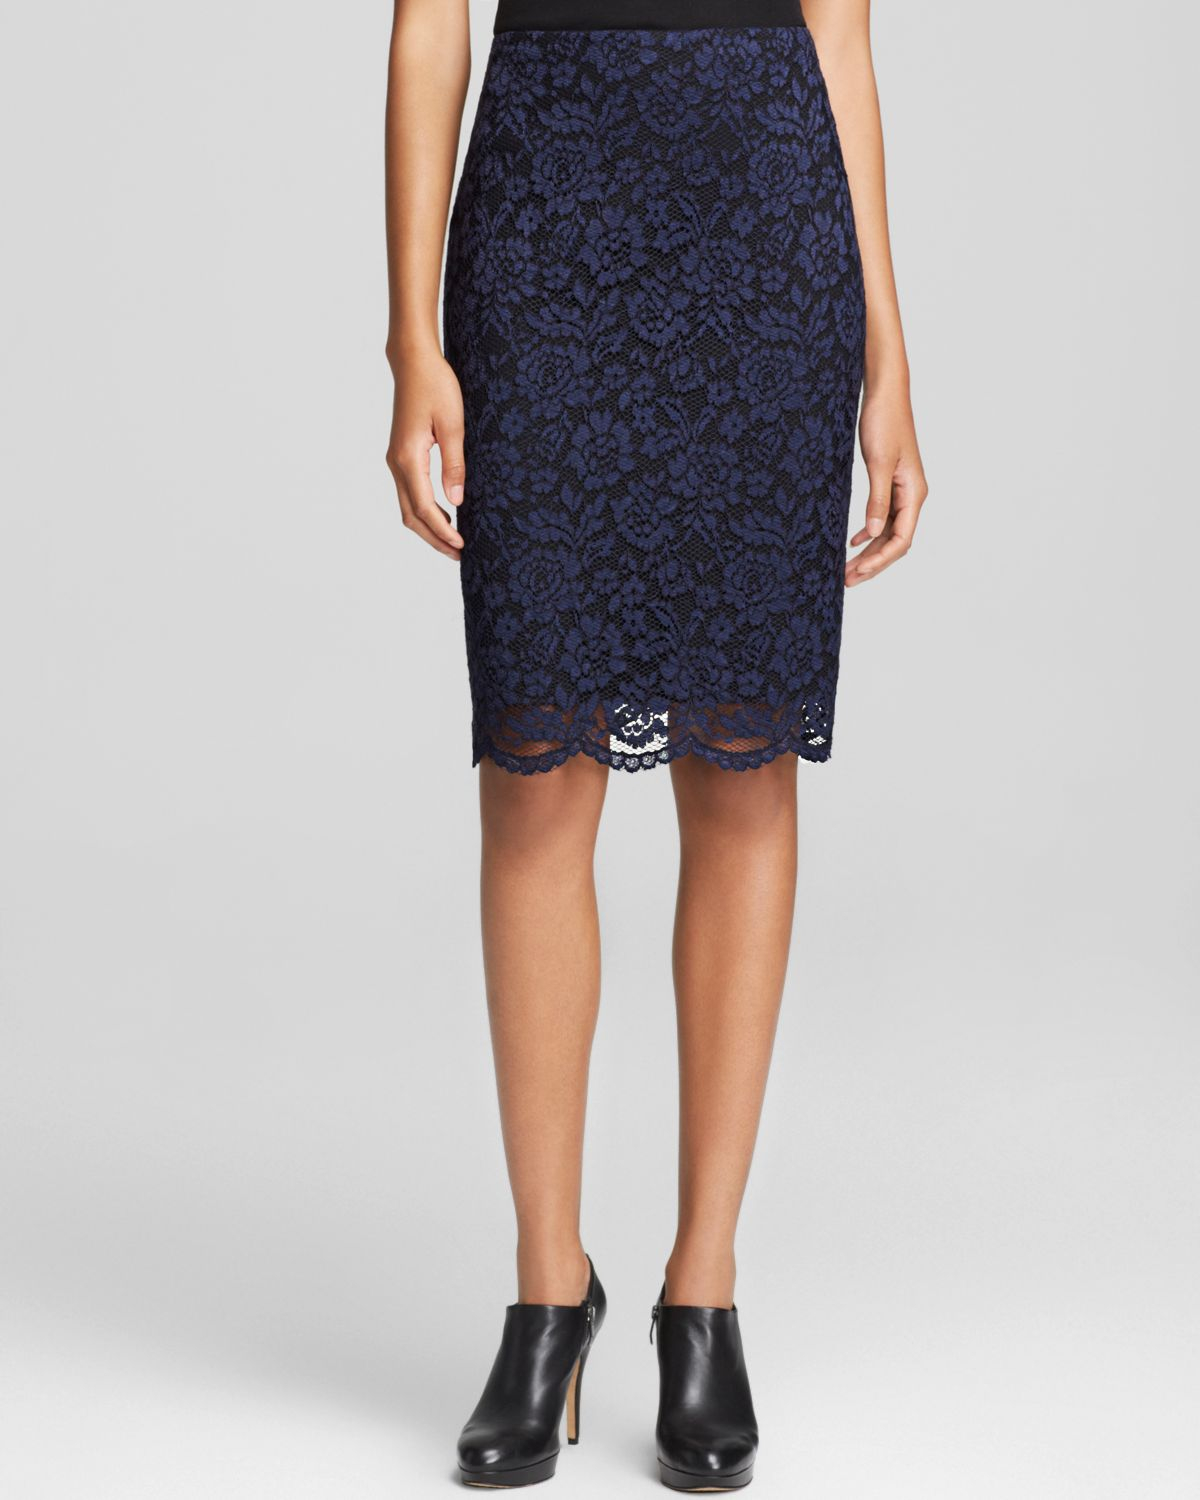 Lyst - Vince Camuto Floral Lace Pencil Skirt in Black